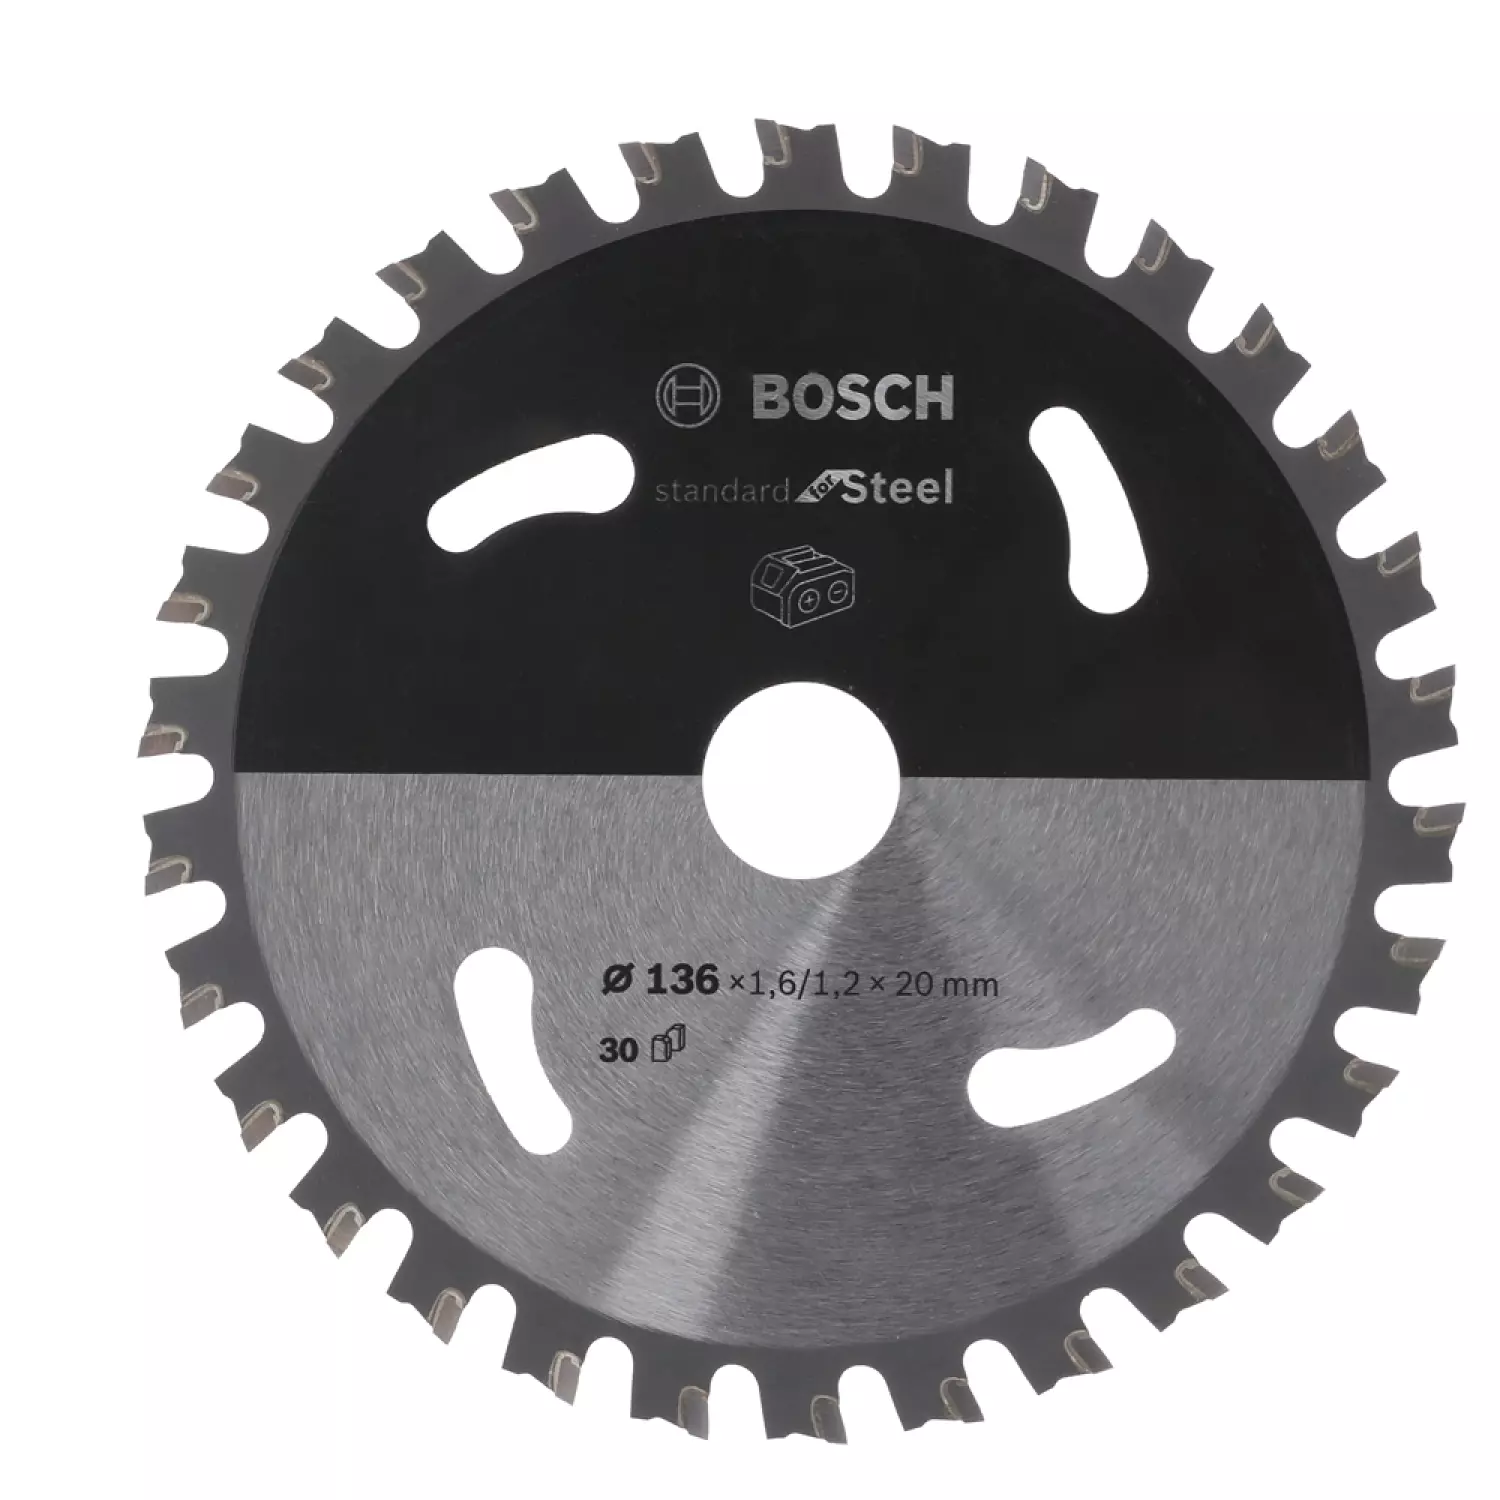 Bosch 2608837747 - Lame pour scie circulaire ACCU Standard for Steel 140x20x1.6/1.2x30T